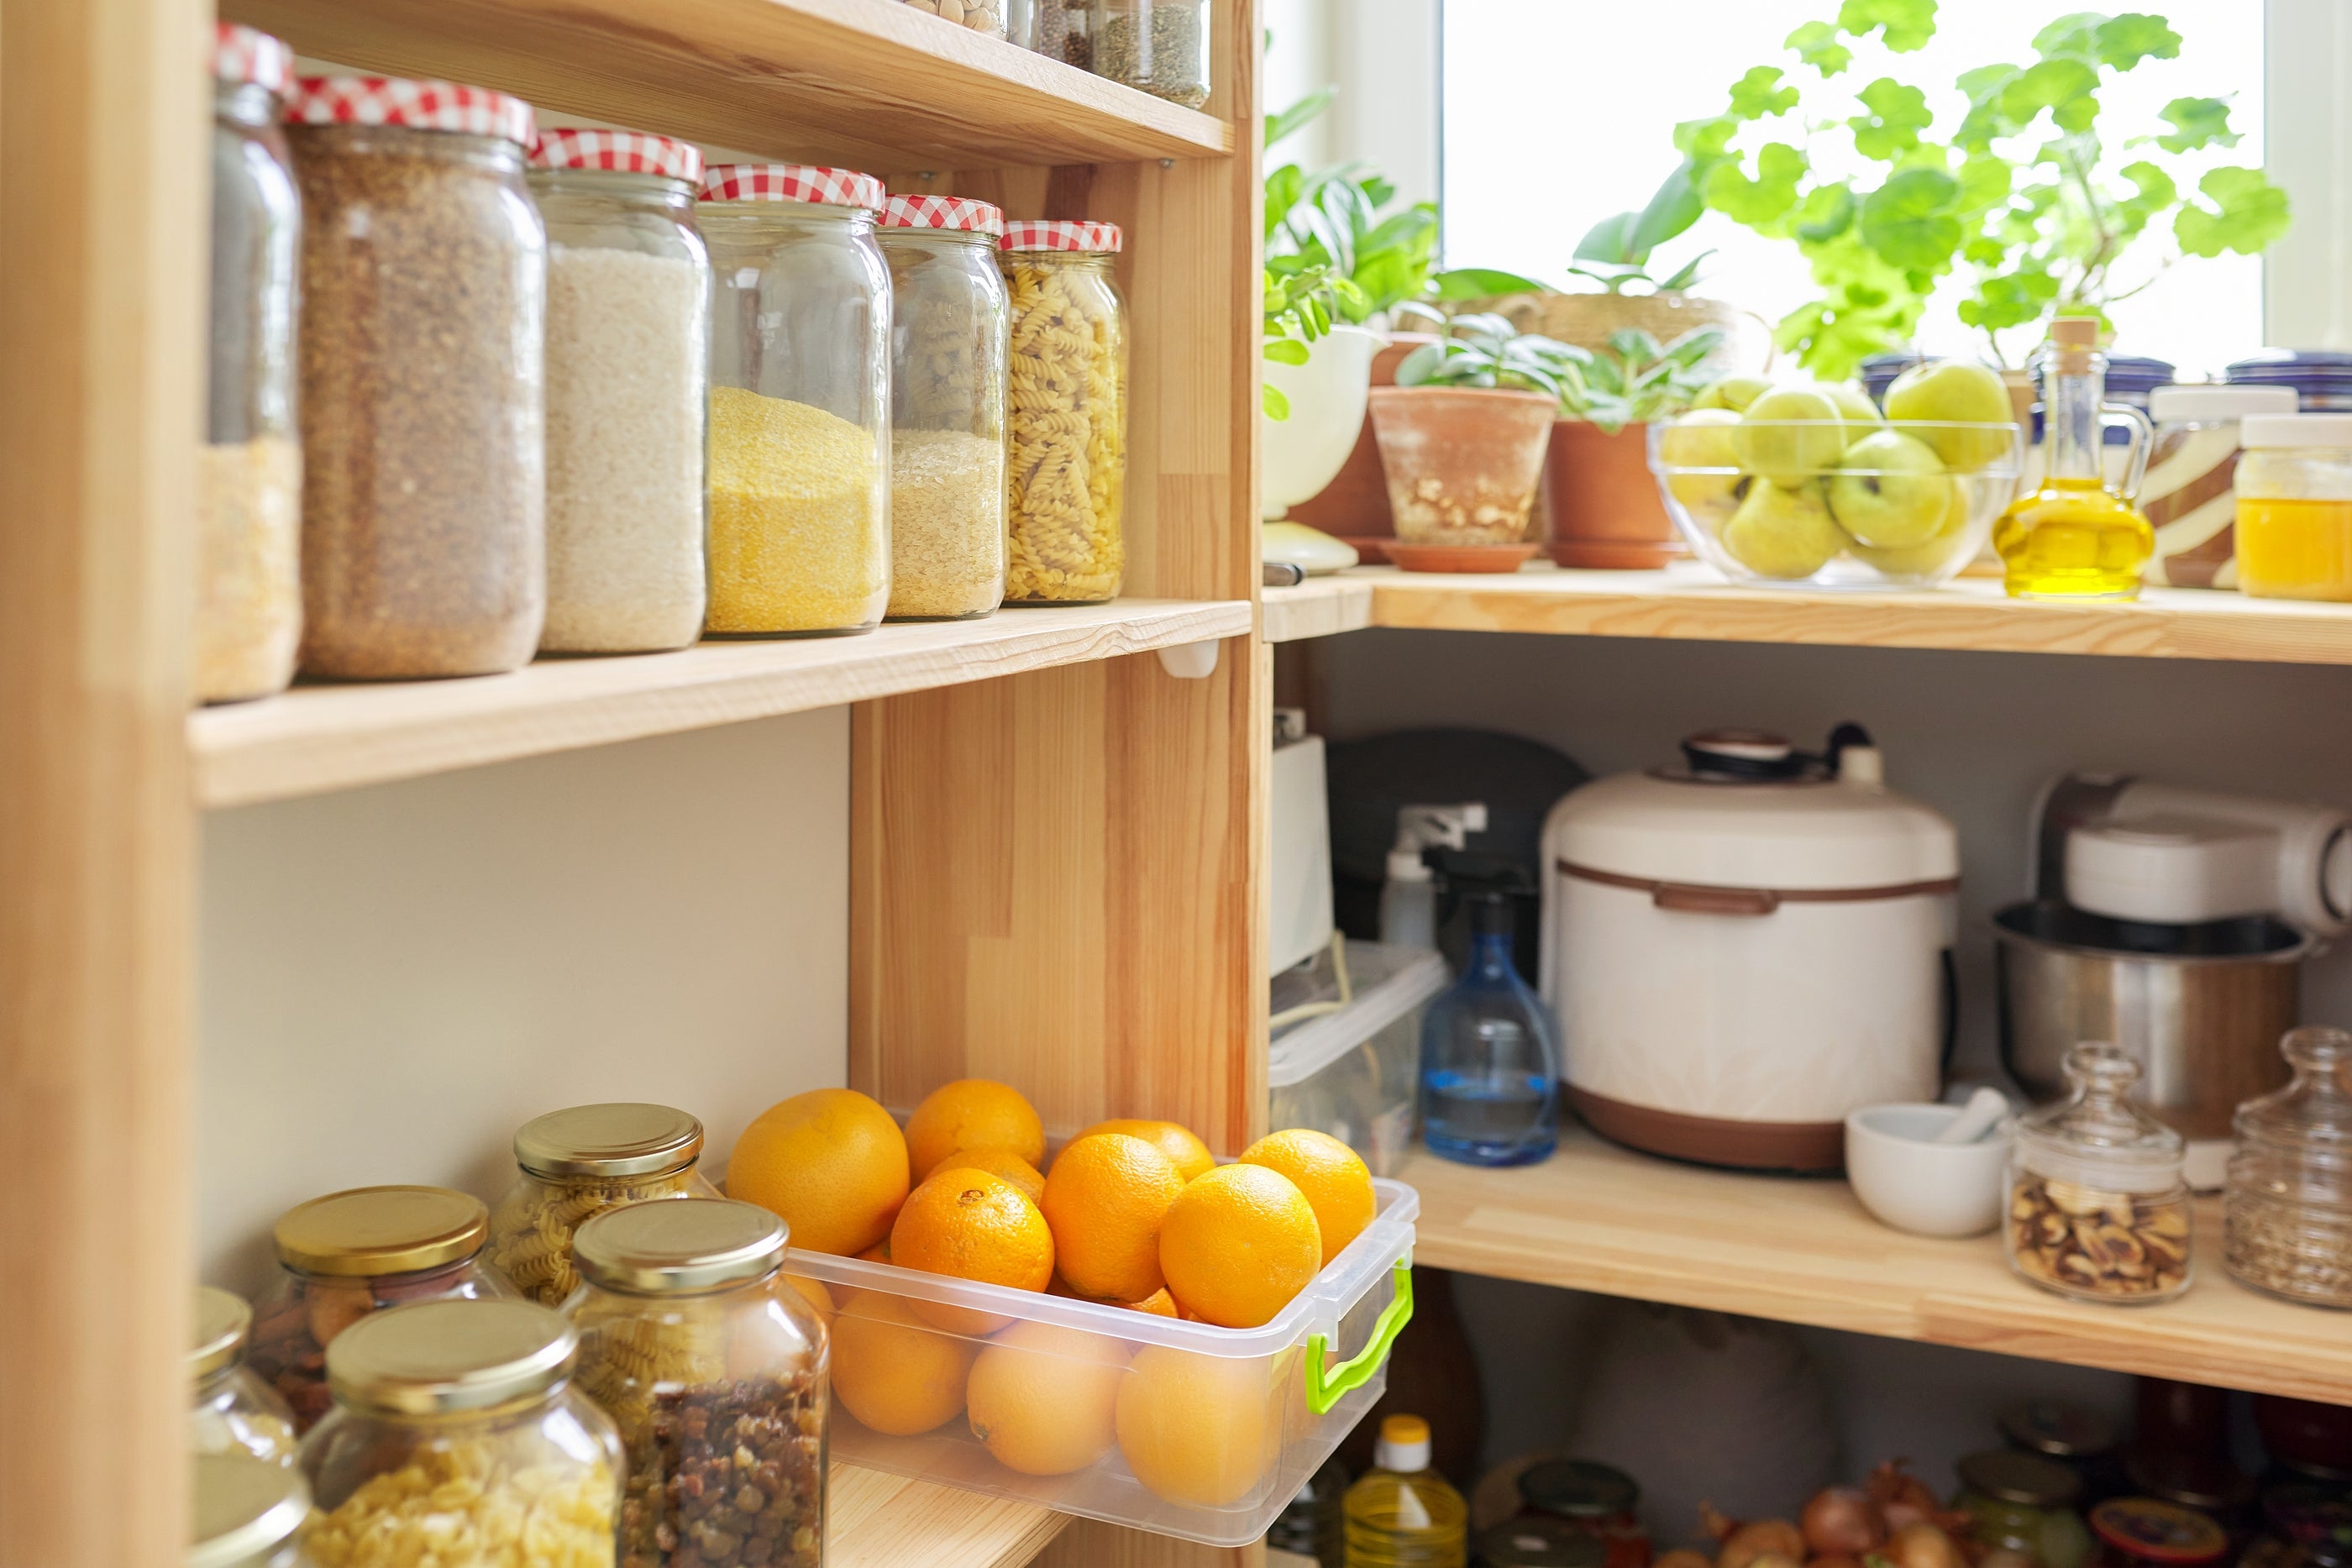 The Remodeled Life: Cleaning and Organizing the Pantry